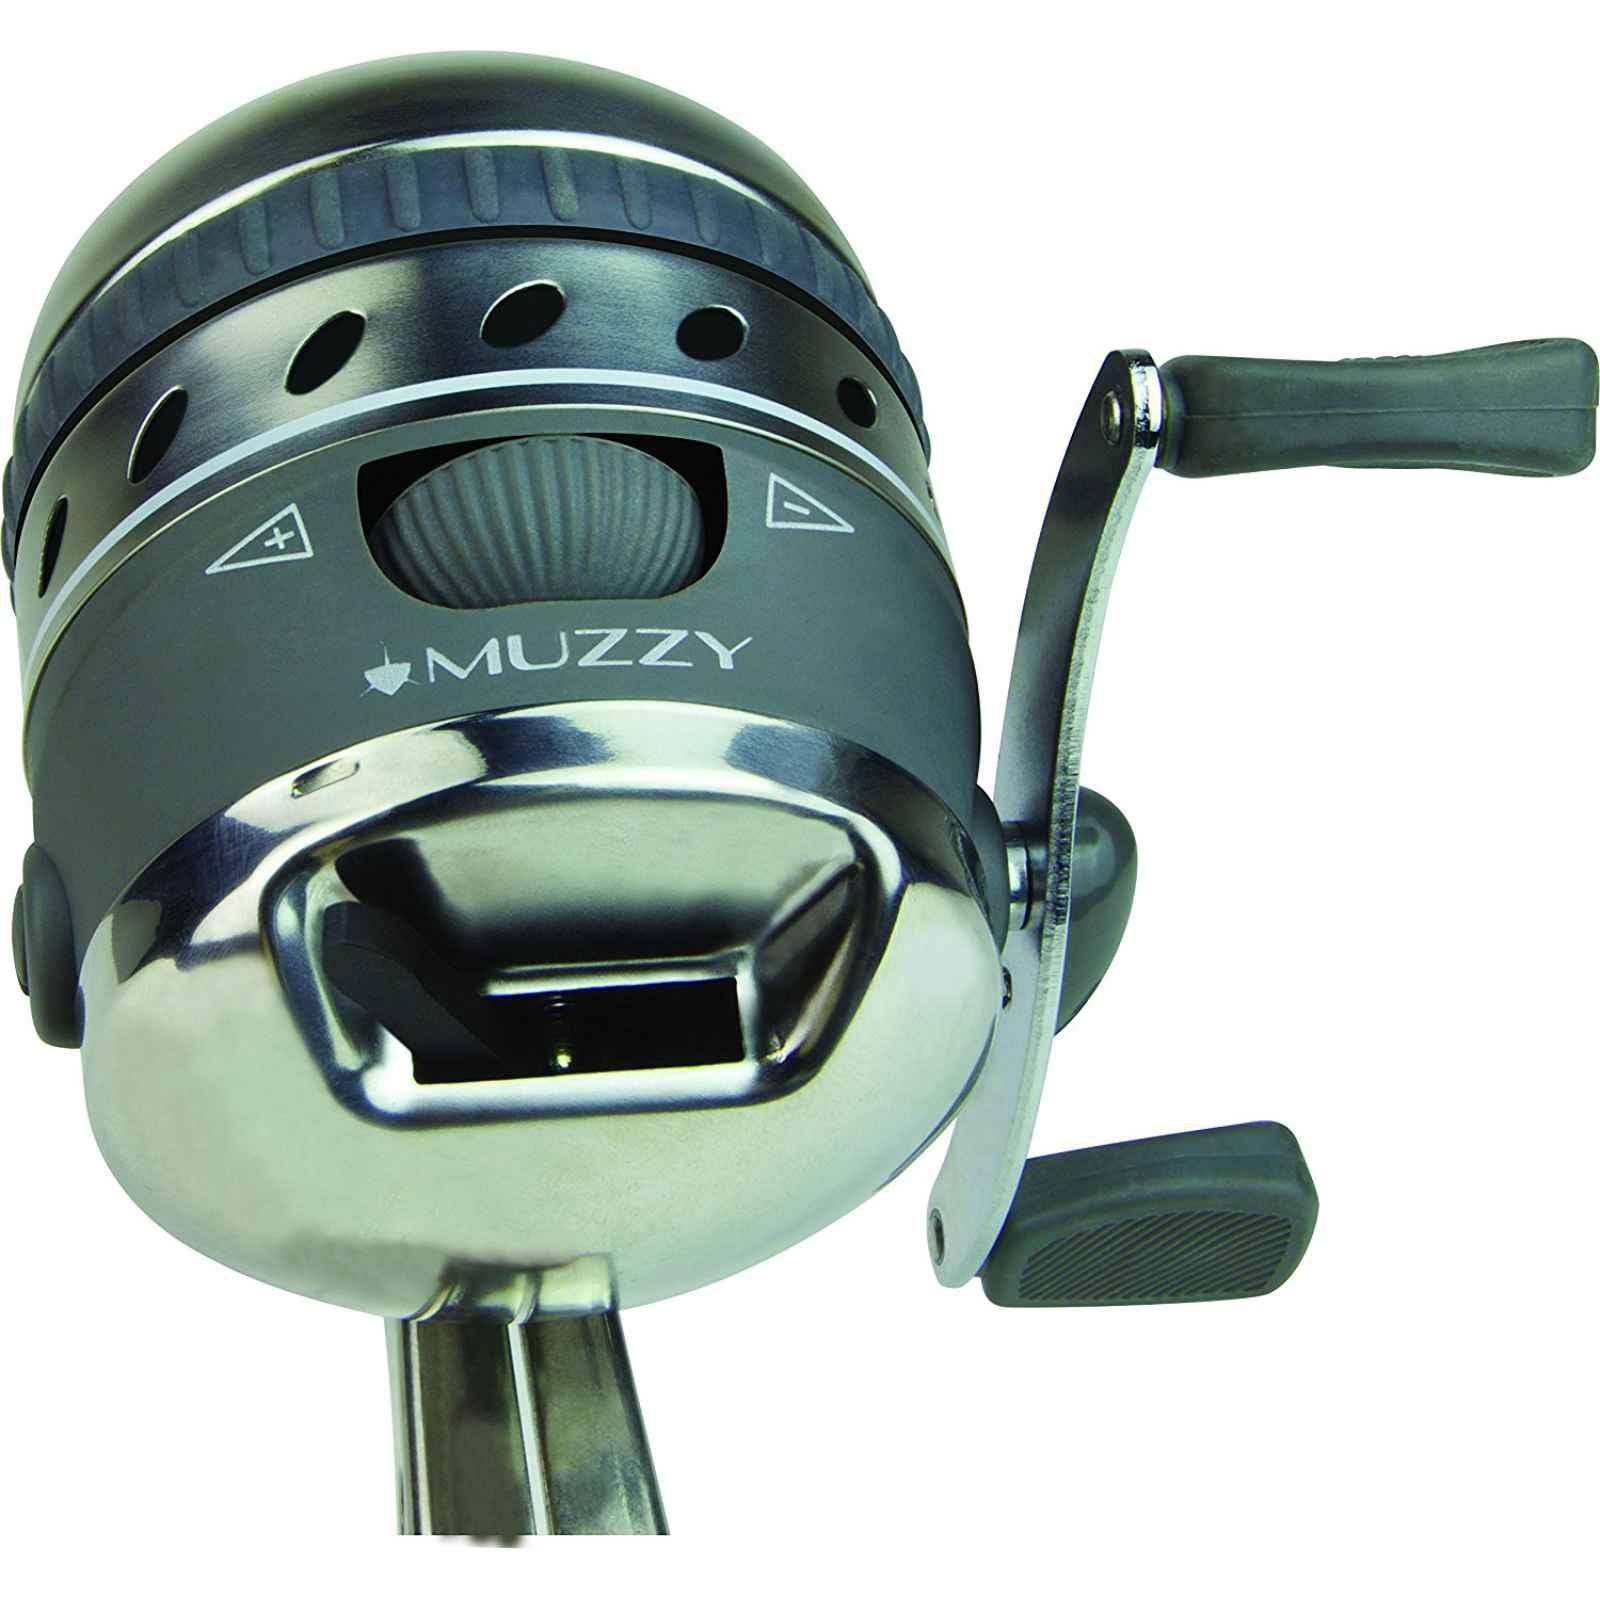 Muzzy Bowfishing Reel Kit - with Mounting Bracket, Left Right Handed